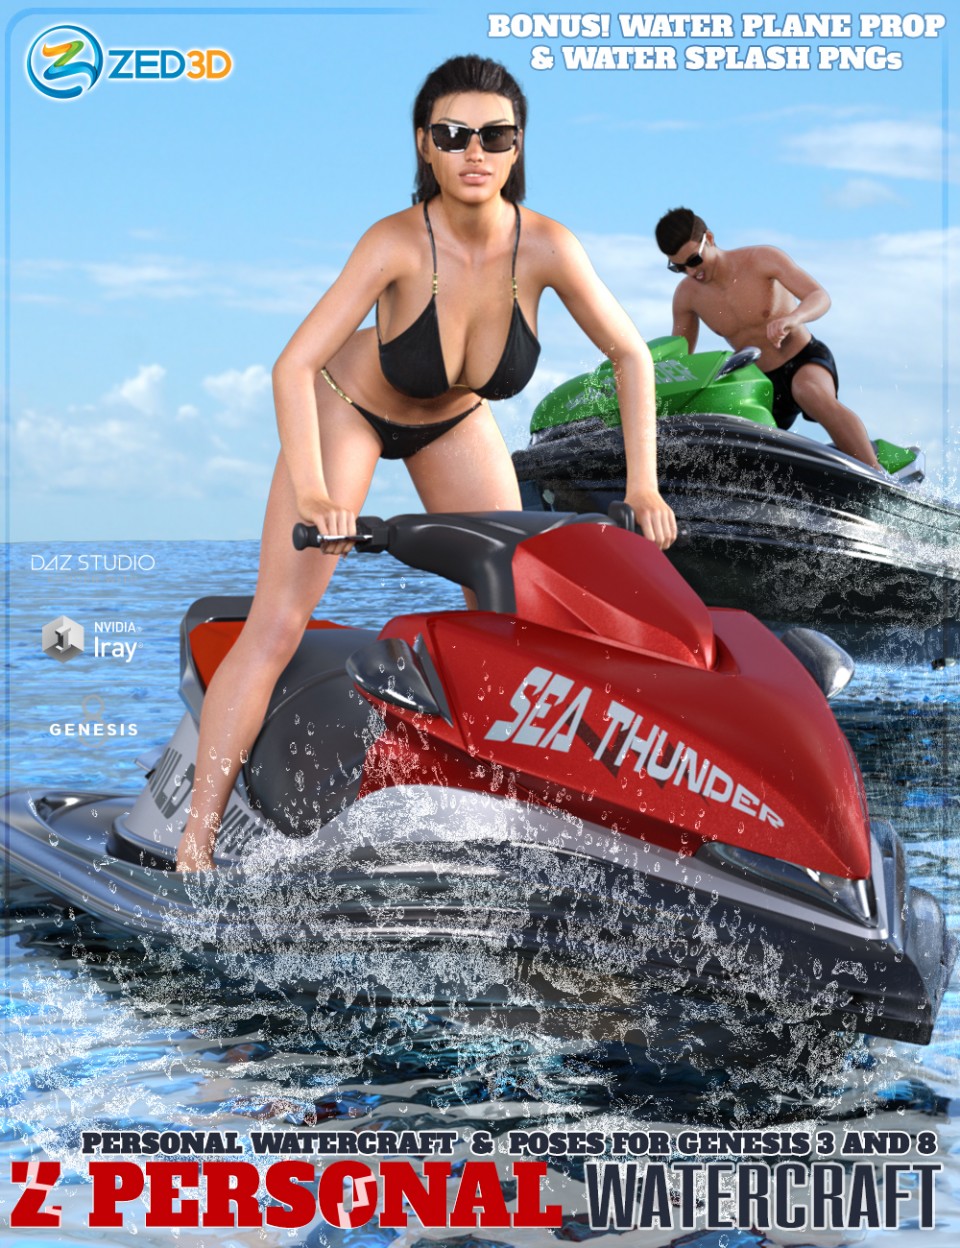 z-personal-watercraft-and-poses-for-genesis-3-and-8